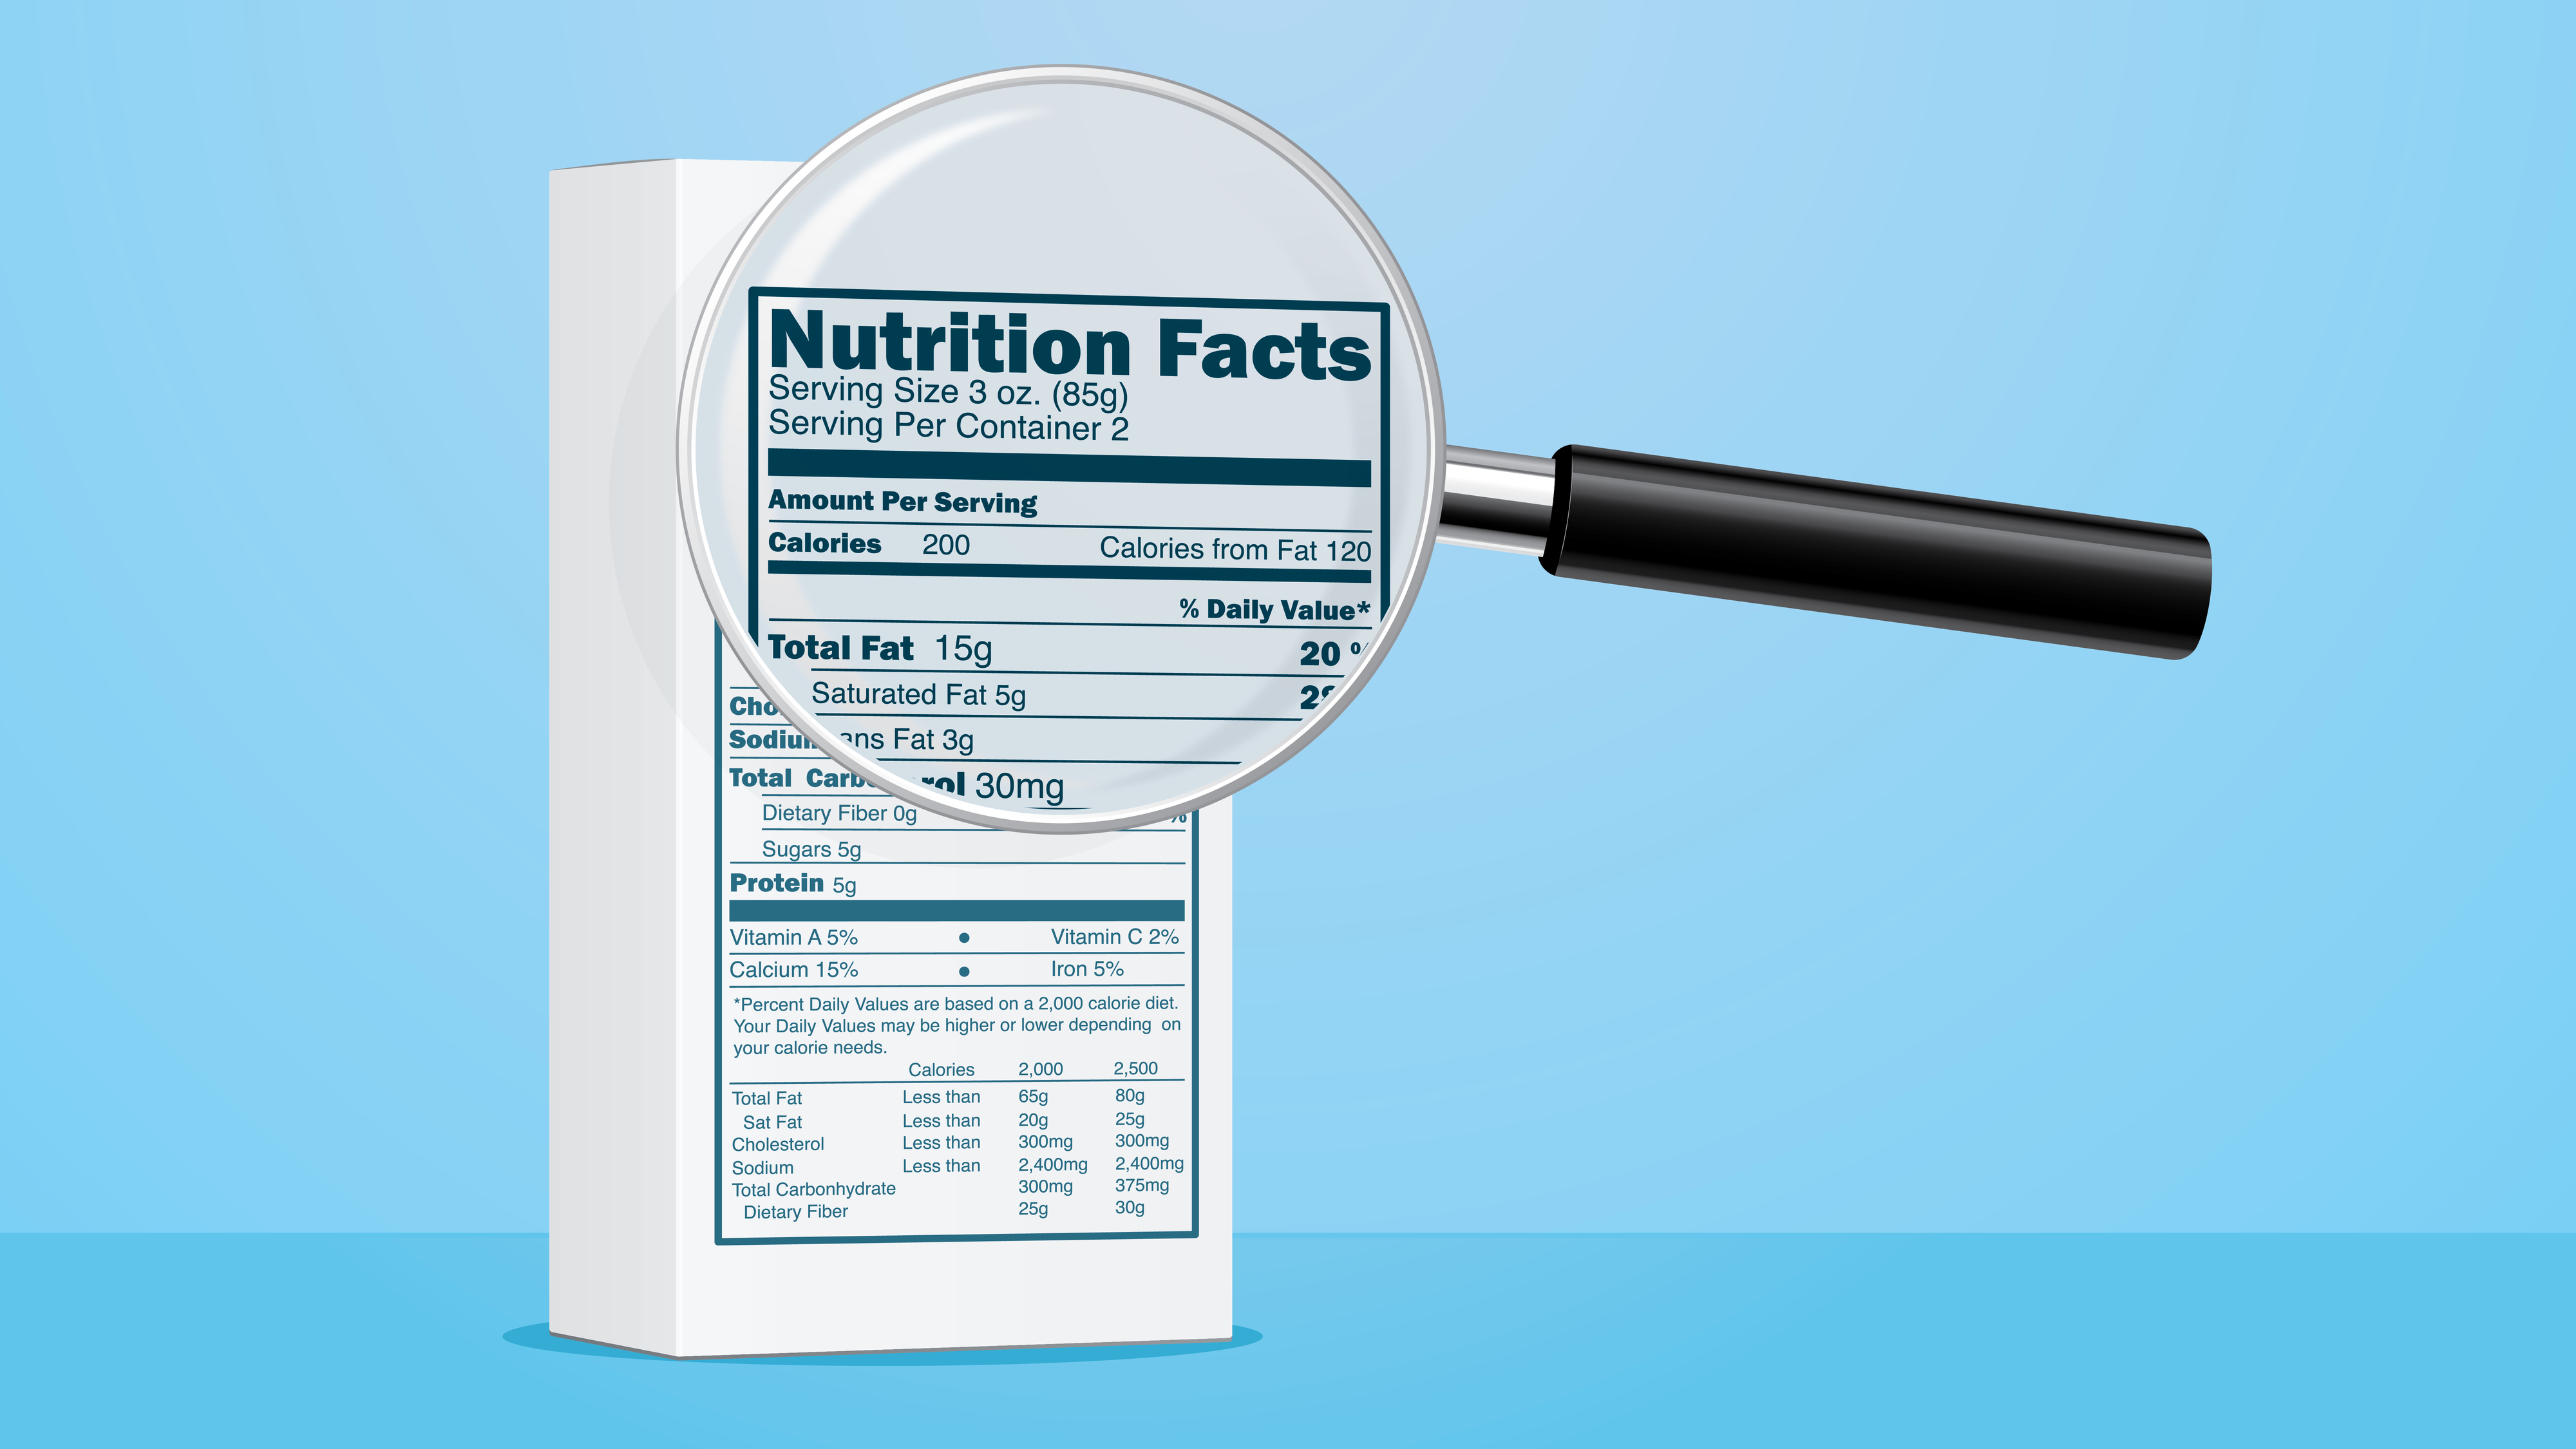 Magnifying glass on a nutrition facts label